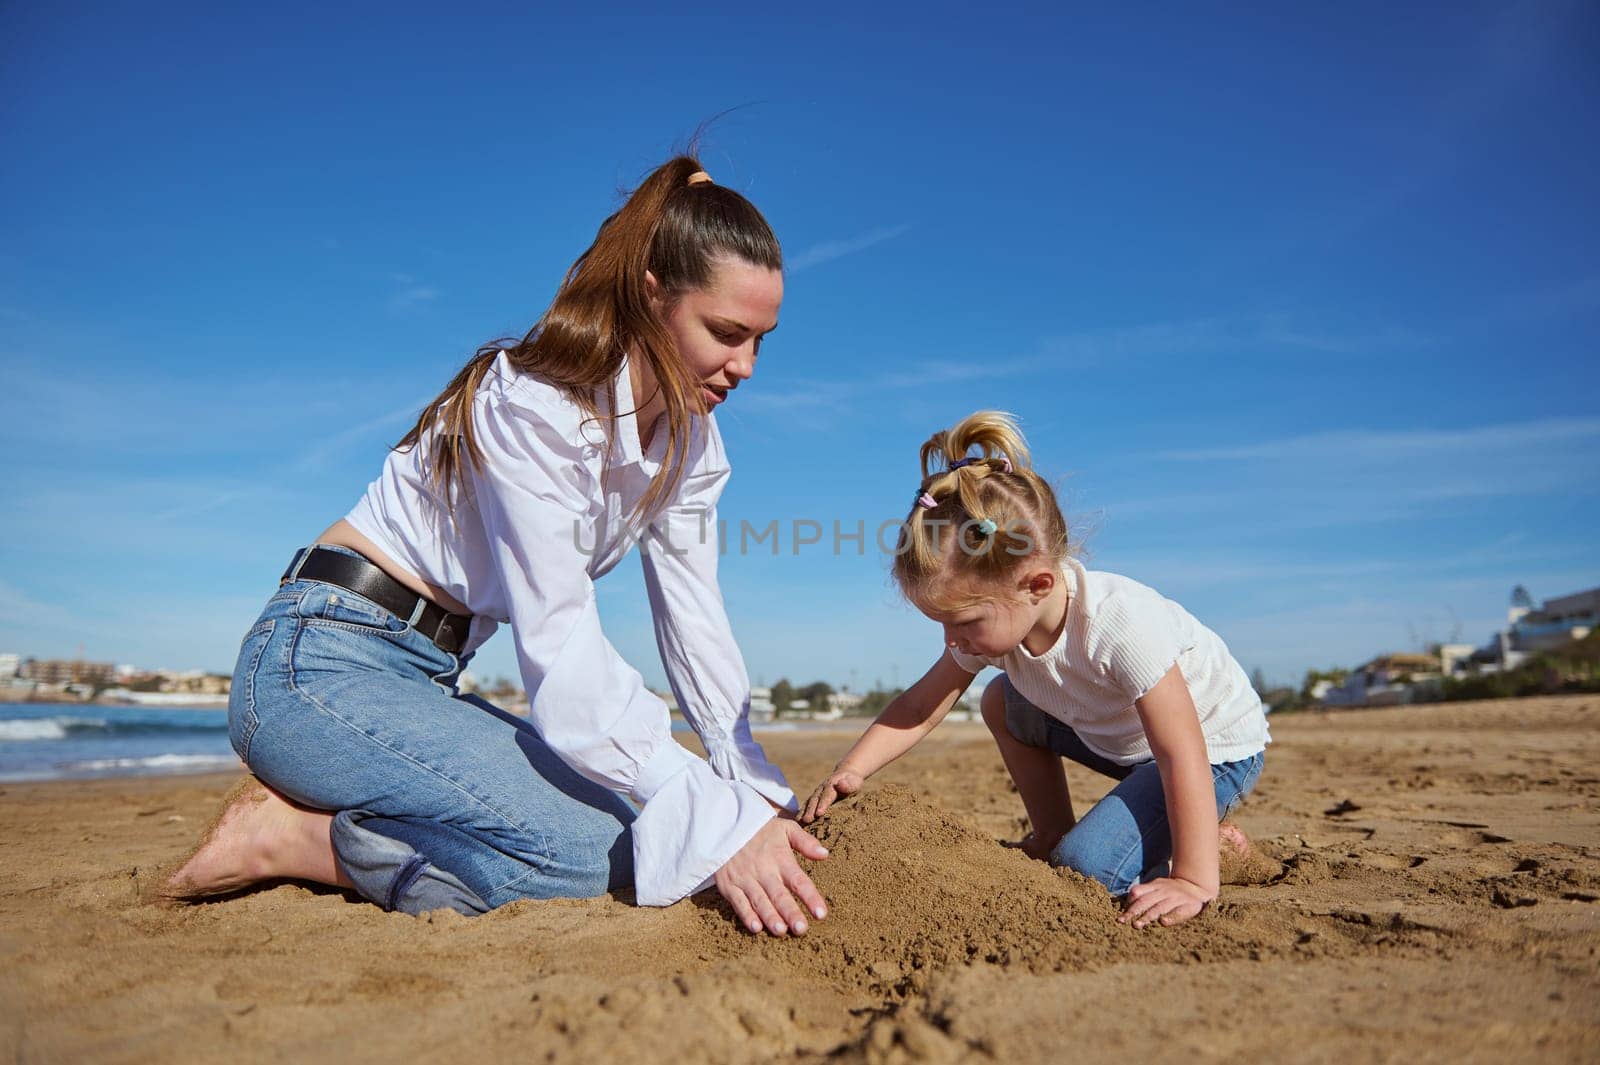 Happy family of mother and her cute little kid girl, building a sand castle on the beach on a sunny day, against the background of the sea and the sky with clouds. Mom and daughter relaxing together.